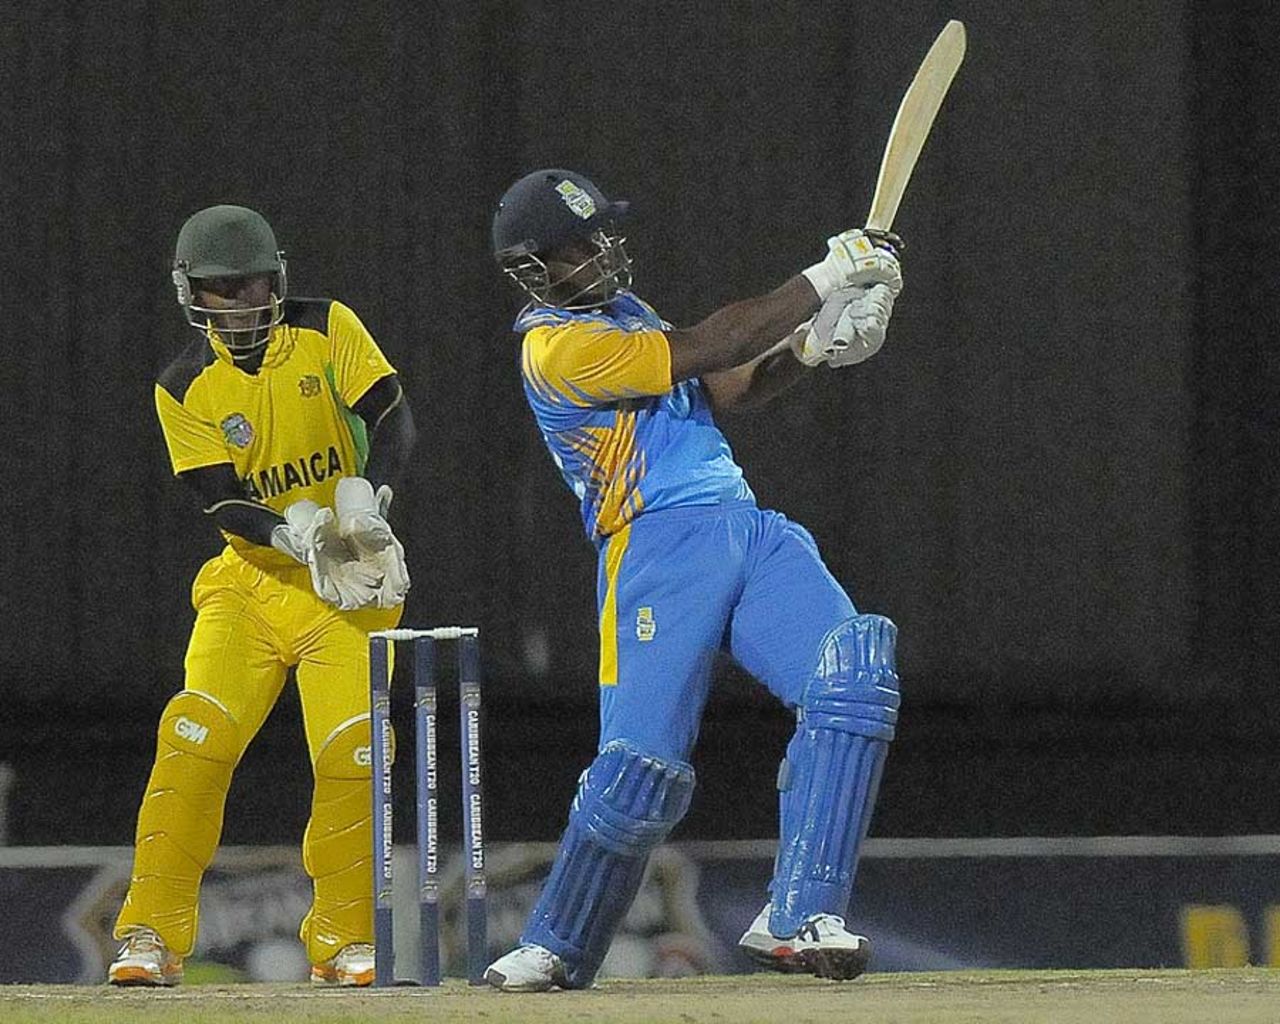 Dwayne Smith smashes one on his way to 86, Barbados v Jamaica, Caribbean T20 2011-12, Group B match, North Sound, Antigua, January 14, 2012